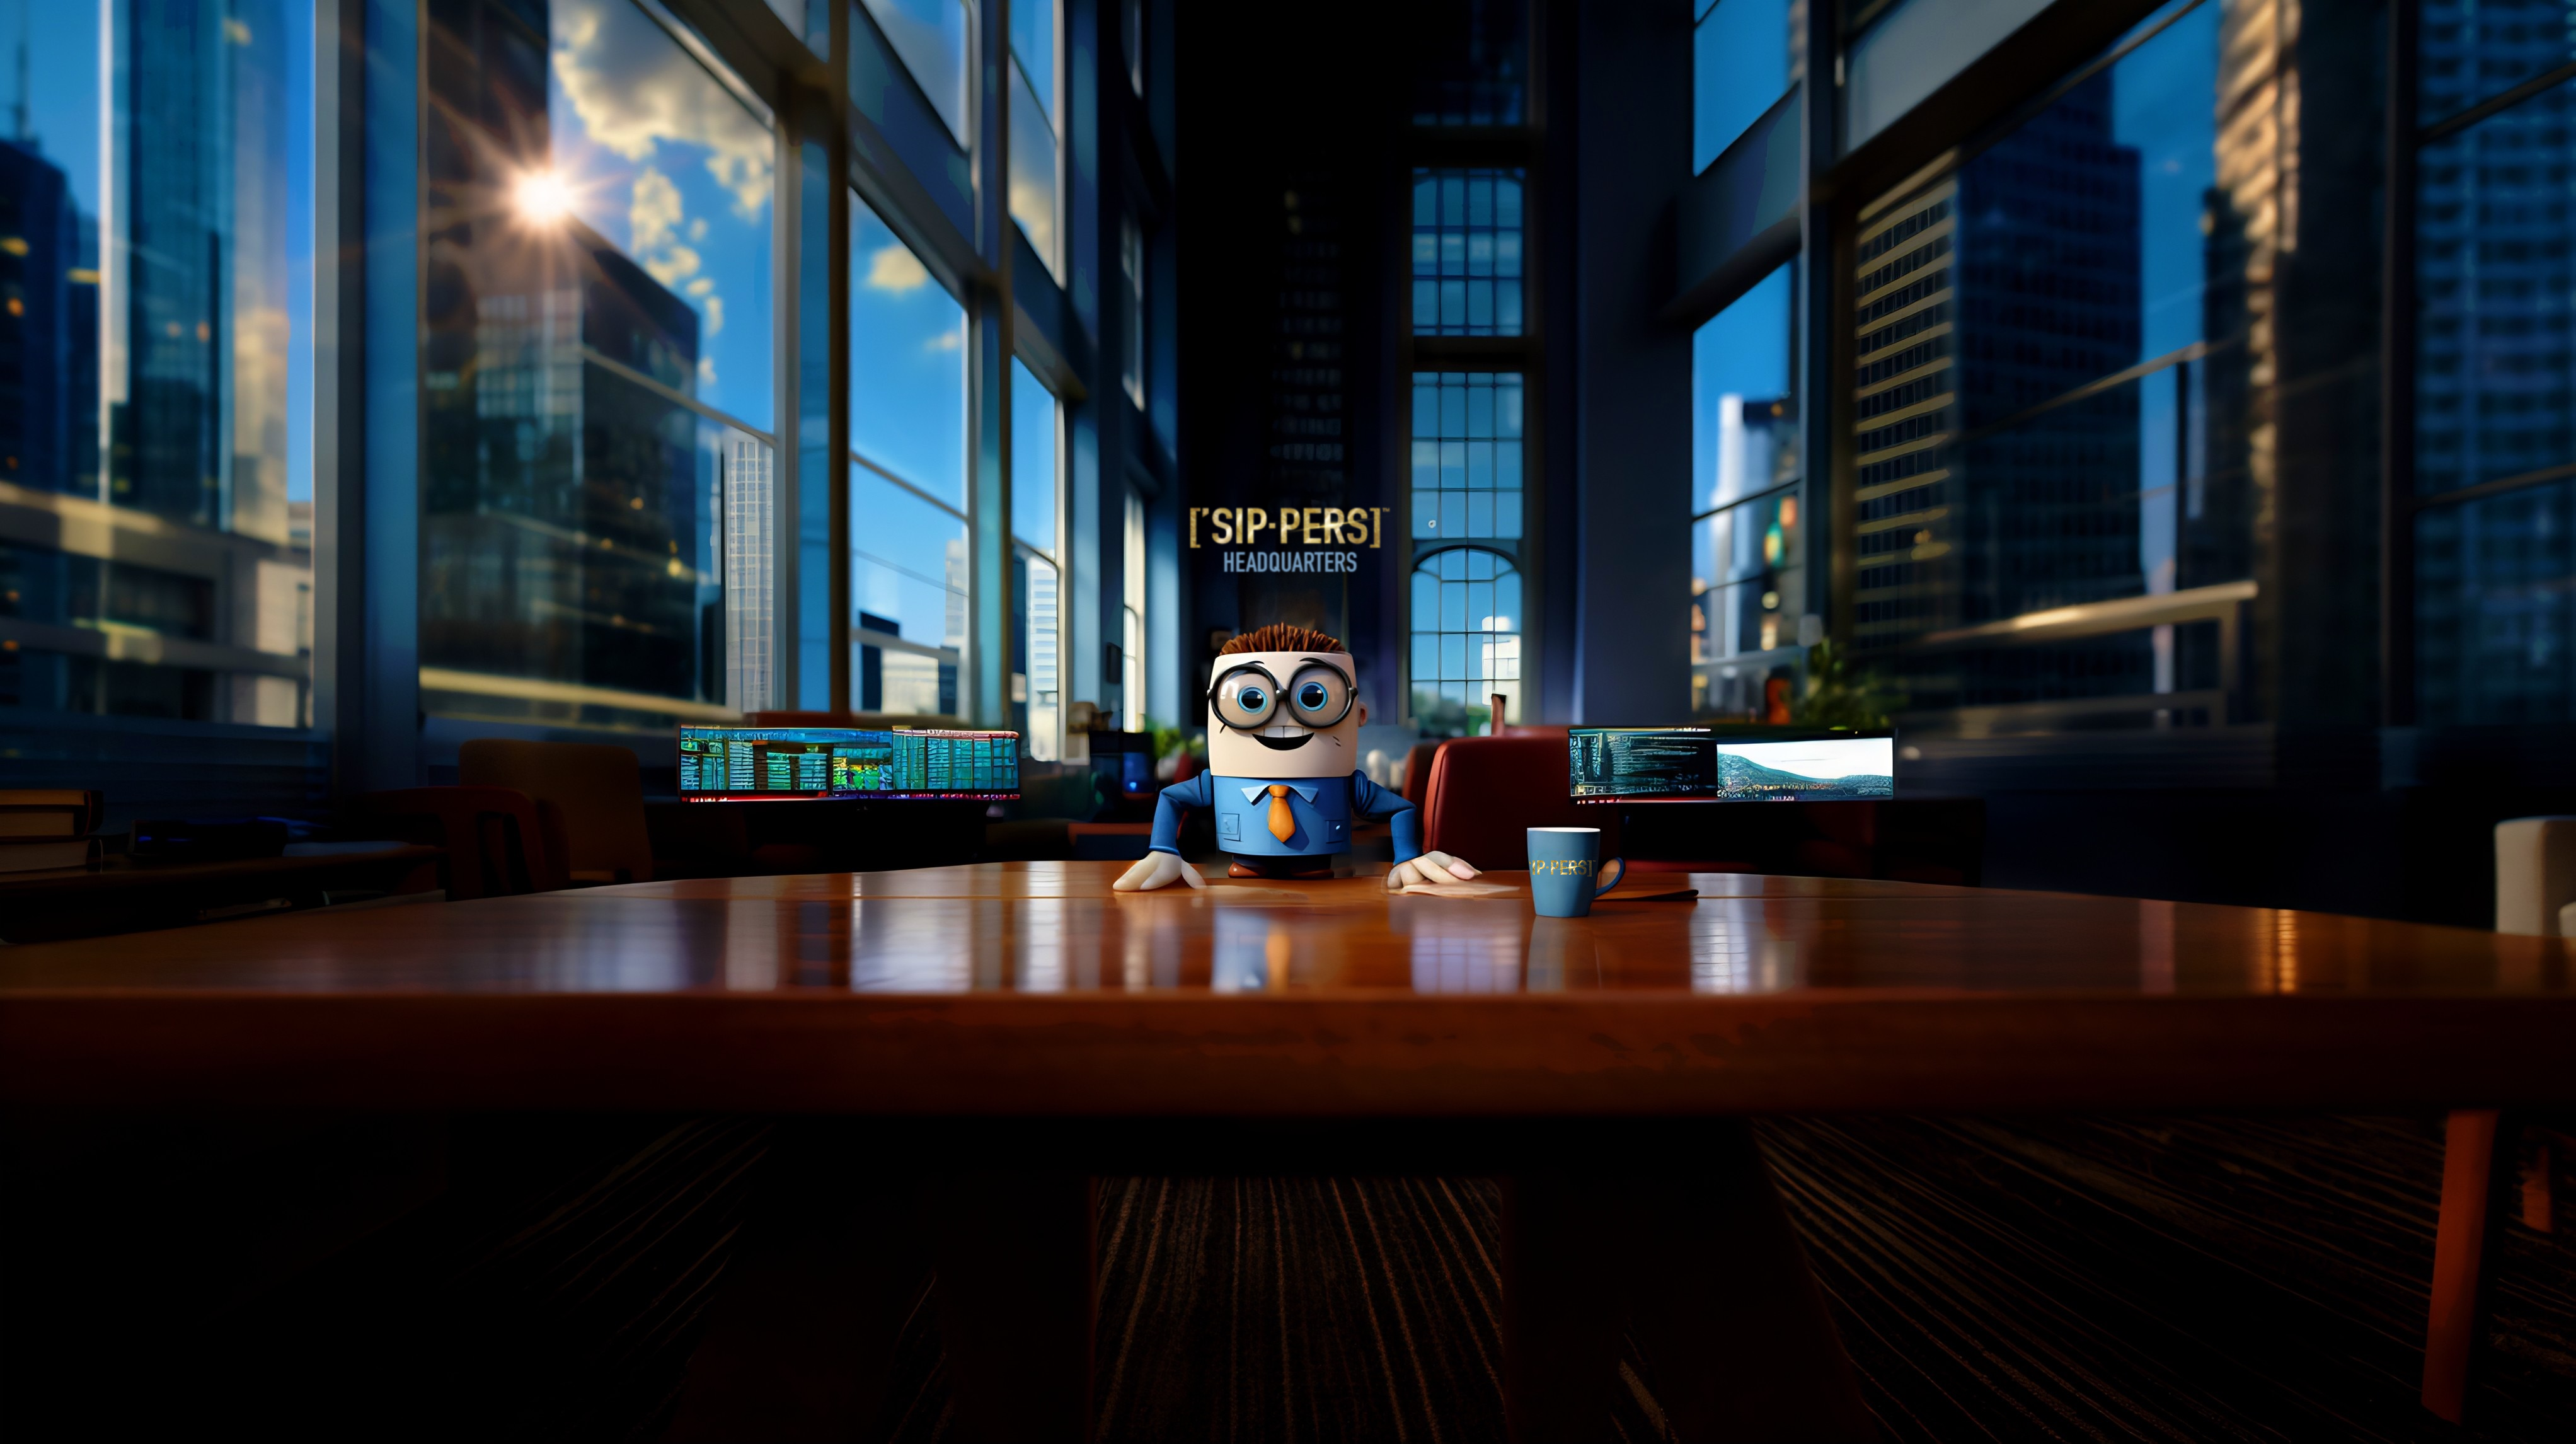 Sippie, a coffee mug character with grey round glasses, big blue eyes, and a smile, dons a blue shirt and orange tie. He sits in a spacious office with tall windows, high ceilings, and multiple computer monitors. A gold-lettered sign on the back wall reads 'SIPPERS HEADQUARTERS'.